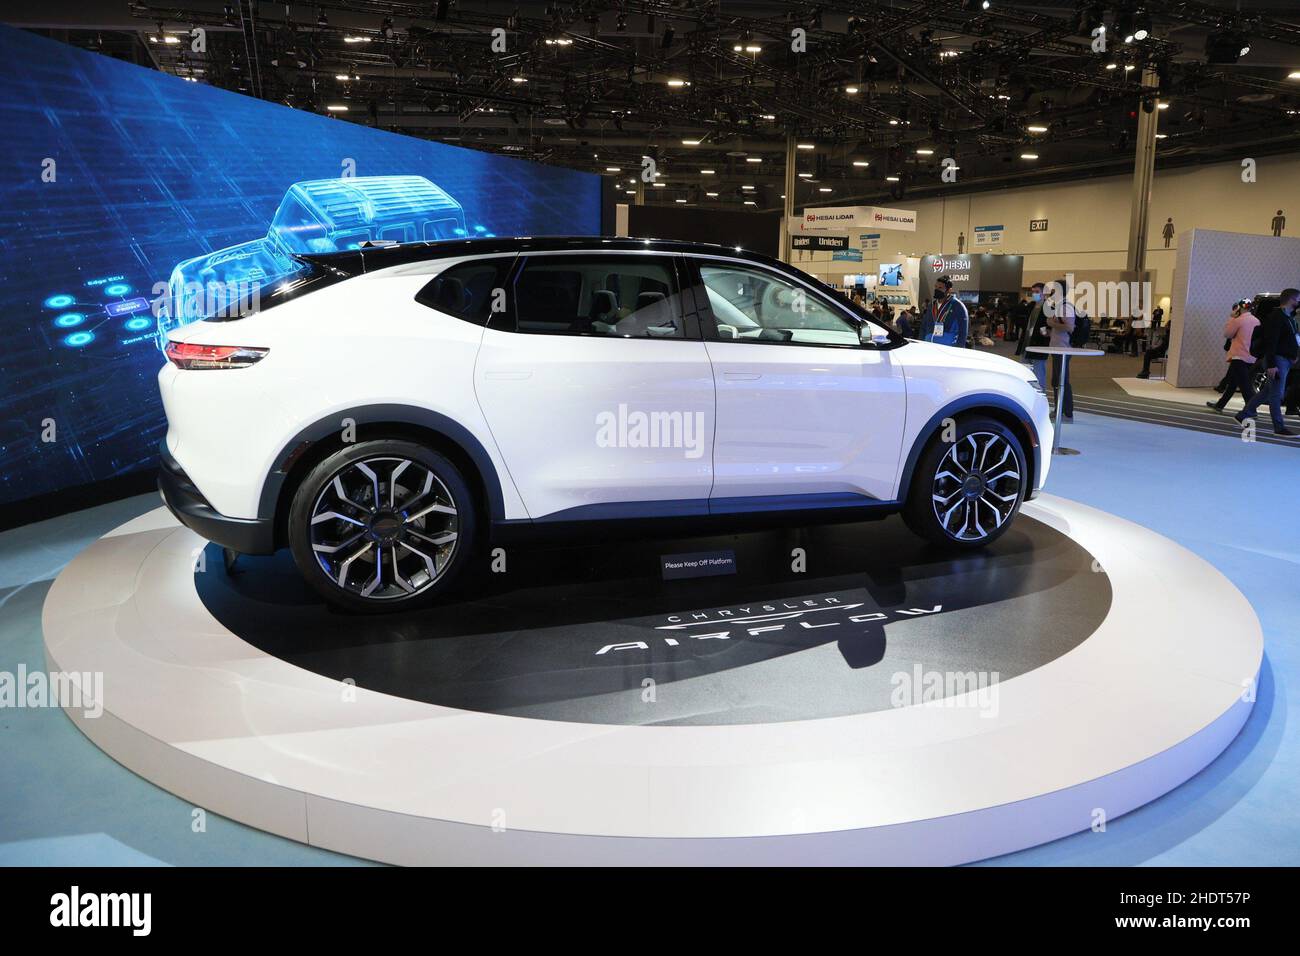 Las Vegas, NV, USA. 6th Jan, 2022. Chrysler Airflow Concept electric vehicle in attendance for International Consumer Electronics Show (CES) - THU, Mandalay Bay Convention Center, Las Vegas, NV January 6, 2022. Credit: JA/Everett Collection/Alamy Live News Stock Photo